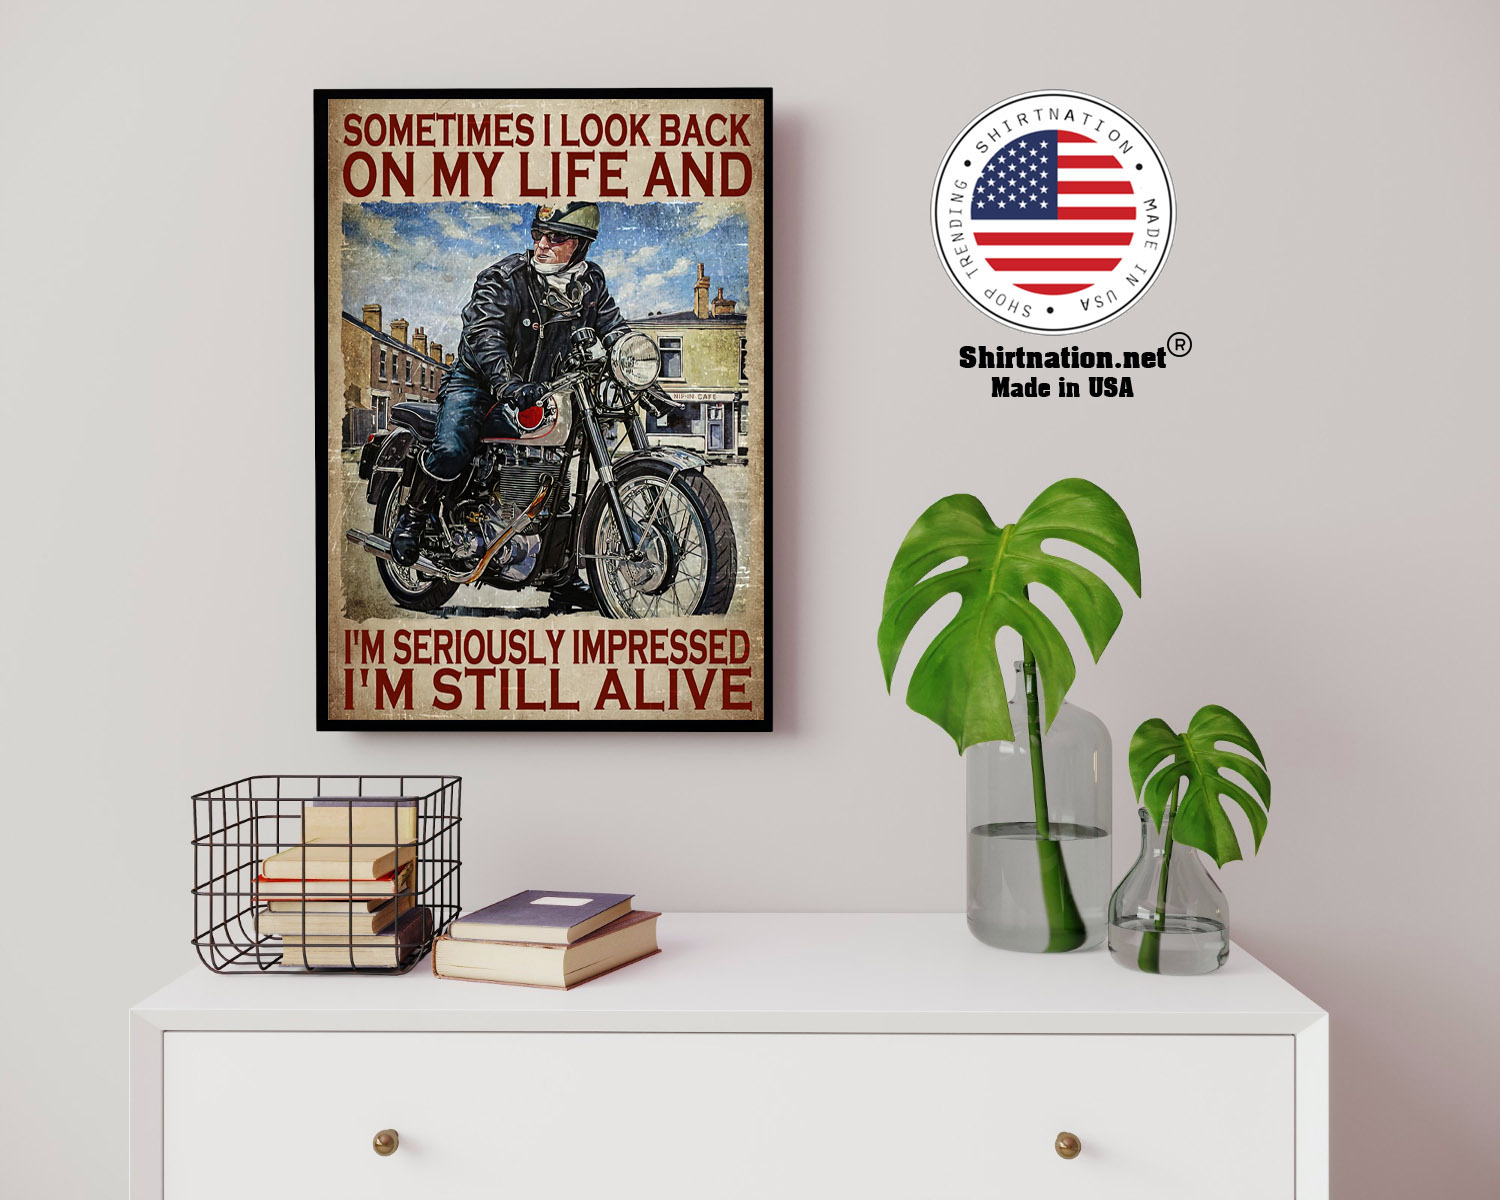 Motorcycles man Sometimes I look back on my life and Im seriously impressed Im still alive poster 14 1